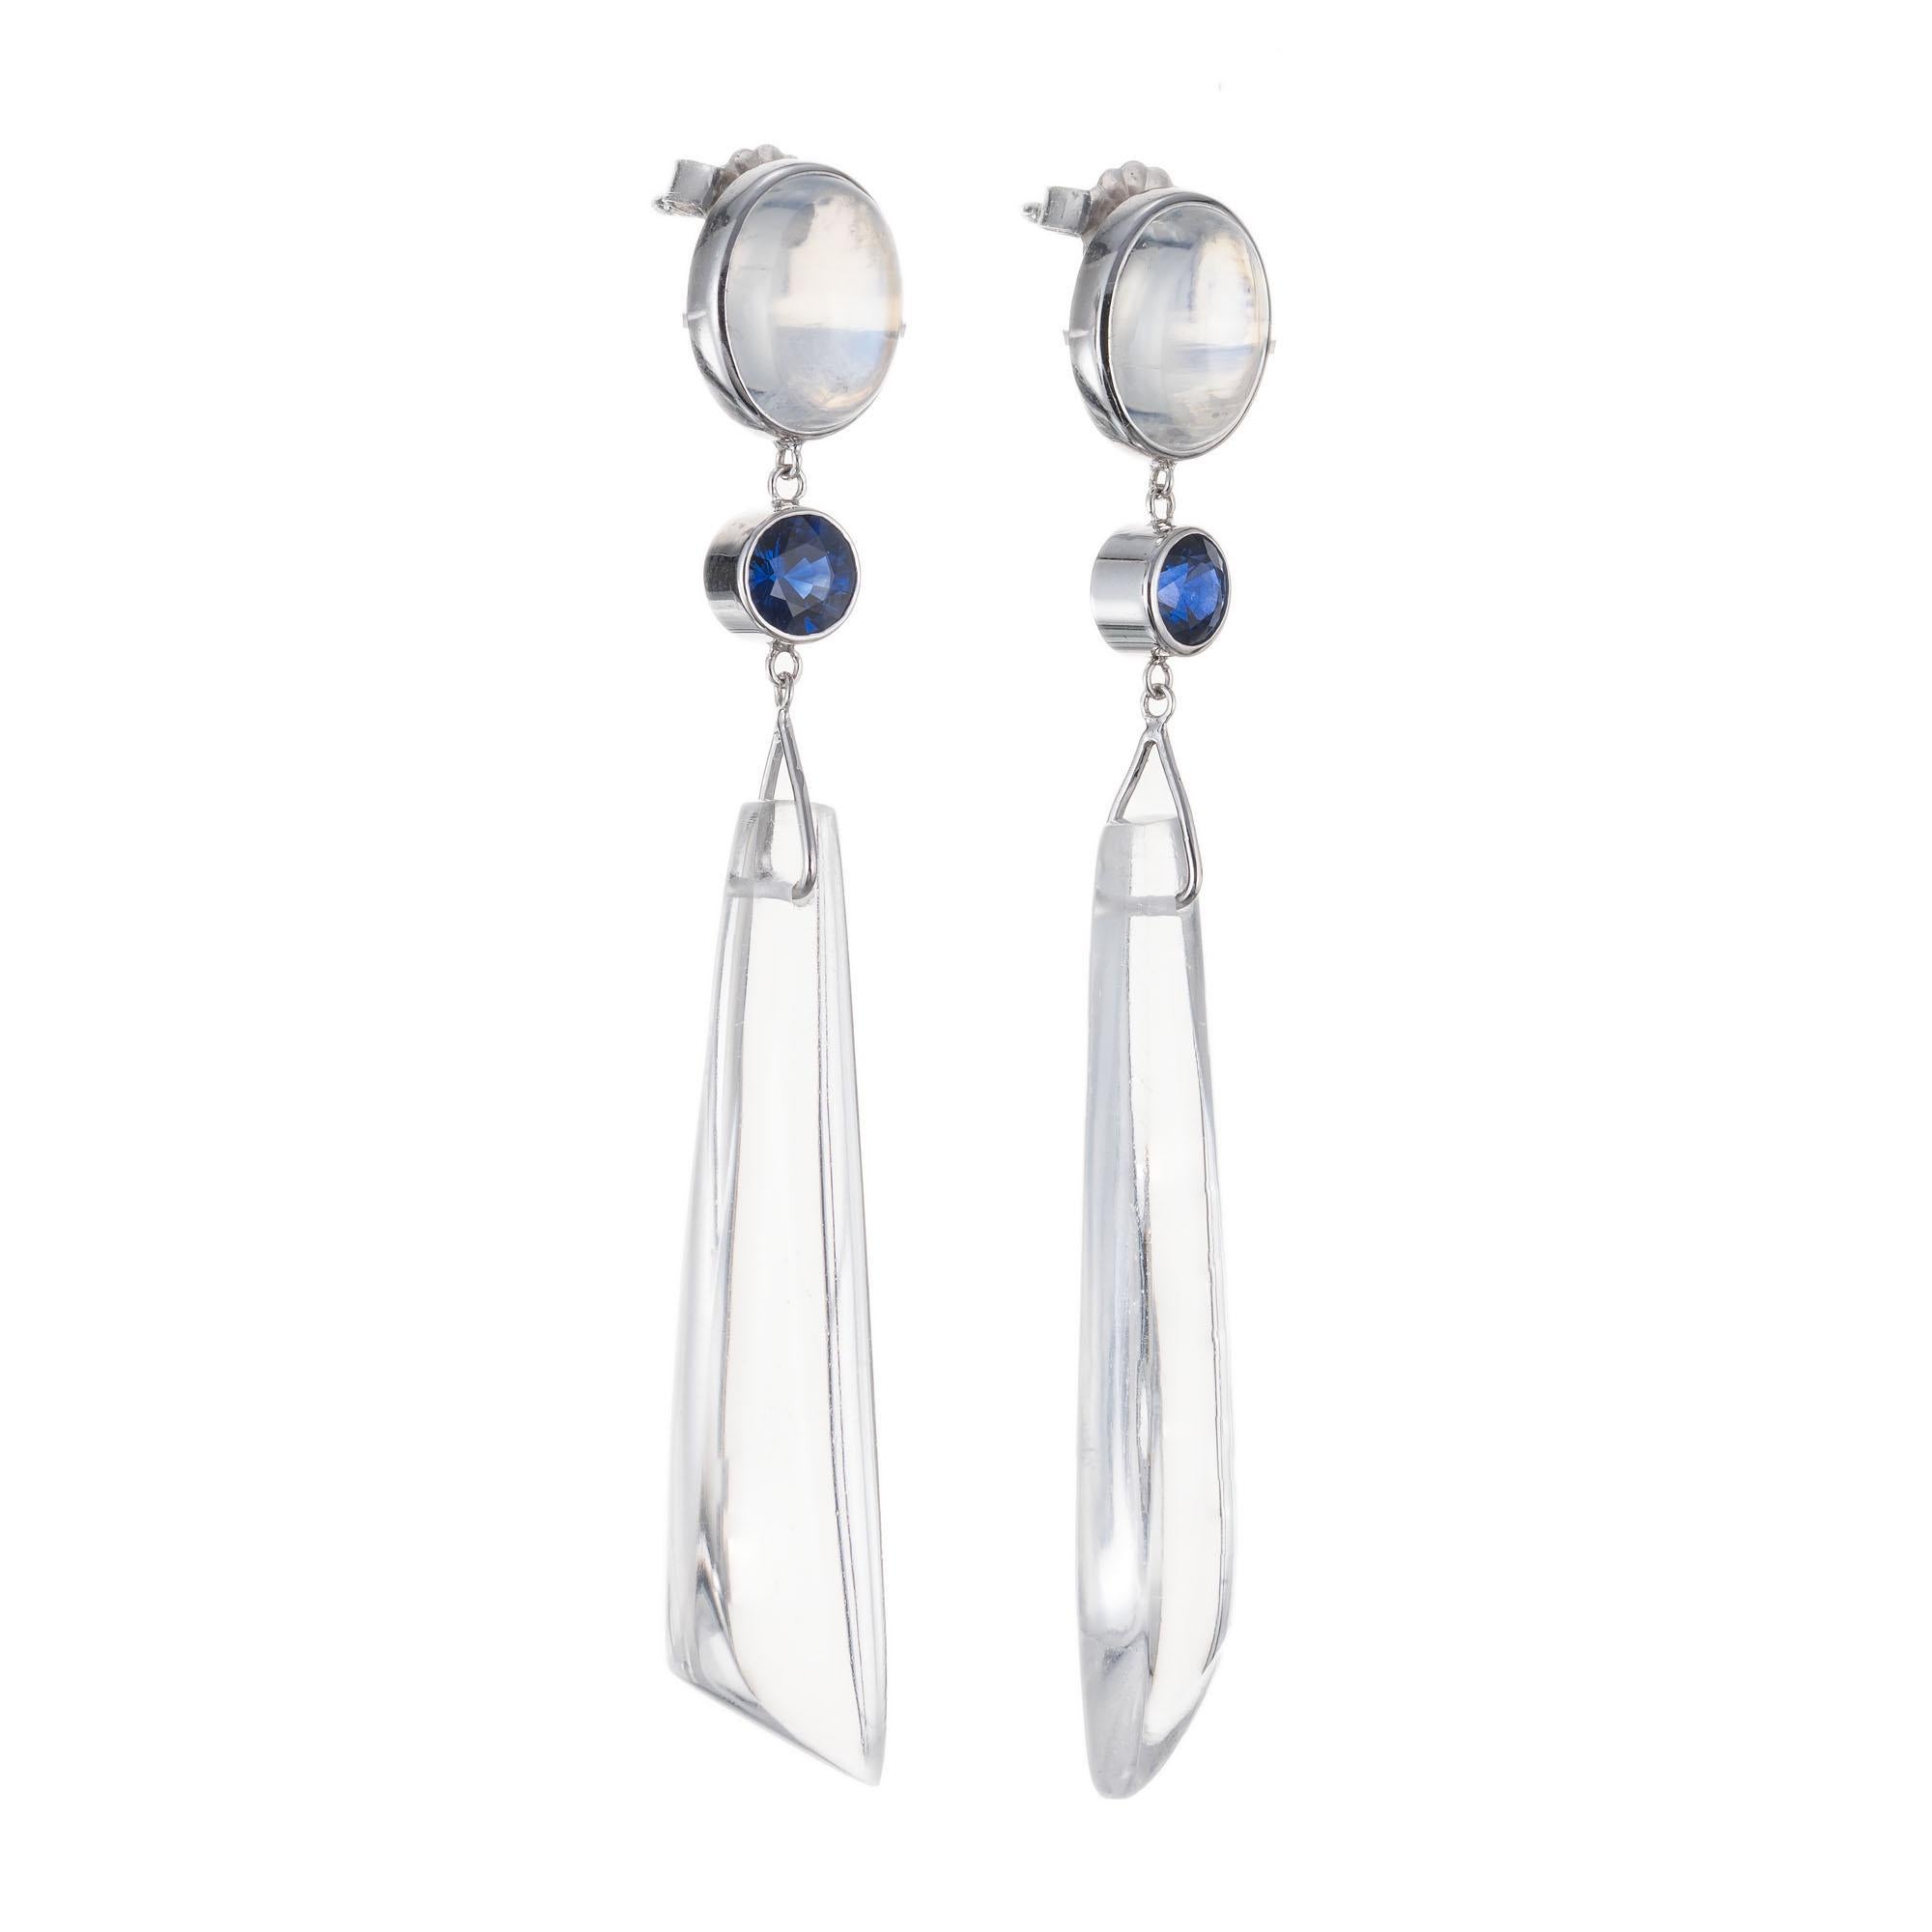 Peter Suchy moonstone and sapphire dangle drop earrings. 2 oval moonstone tops with 2 round sapphires below with 2 pointed clear natural quartz tiers. Handmade in 14k white gold. 

2 oval cabochon clear iridescent blue moonstones, VS approx.